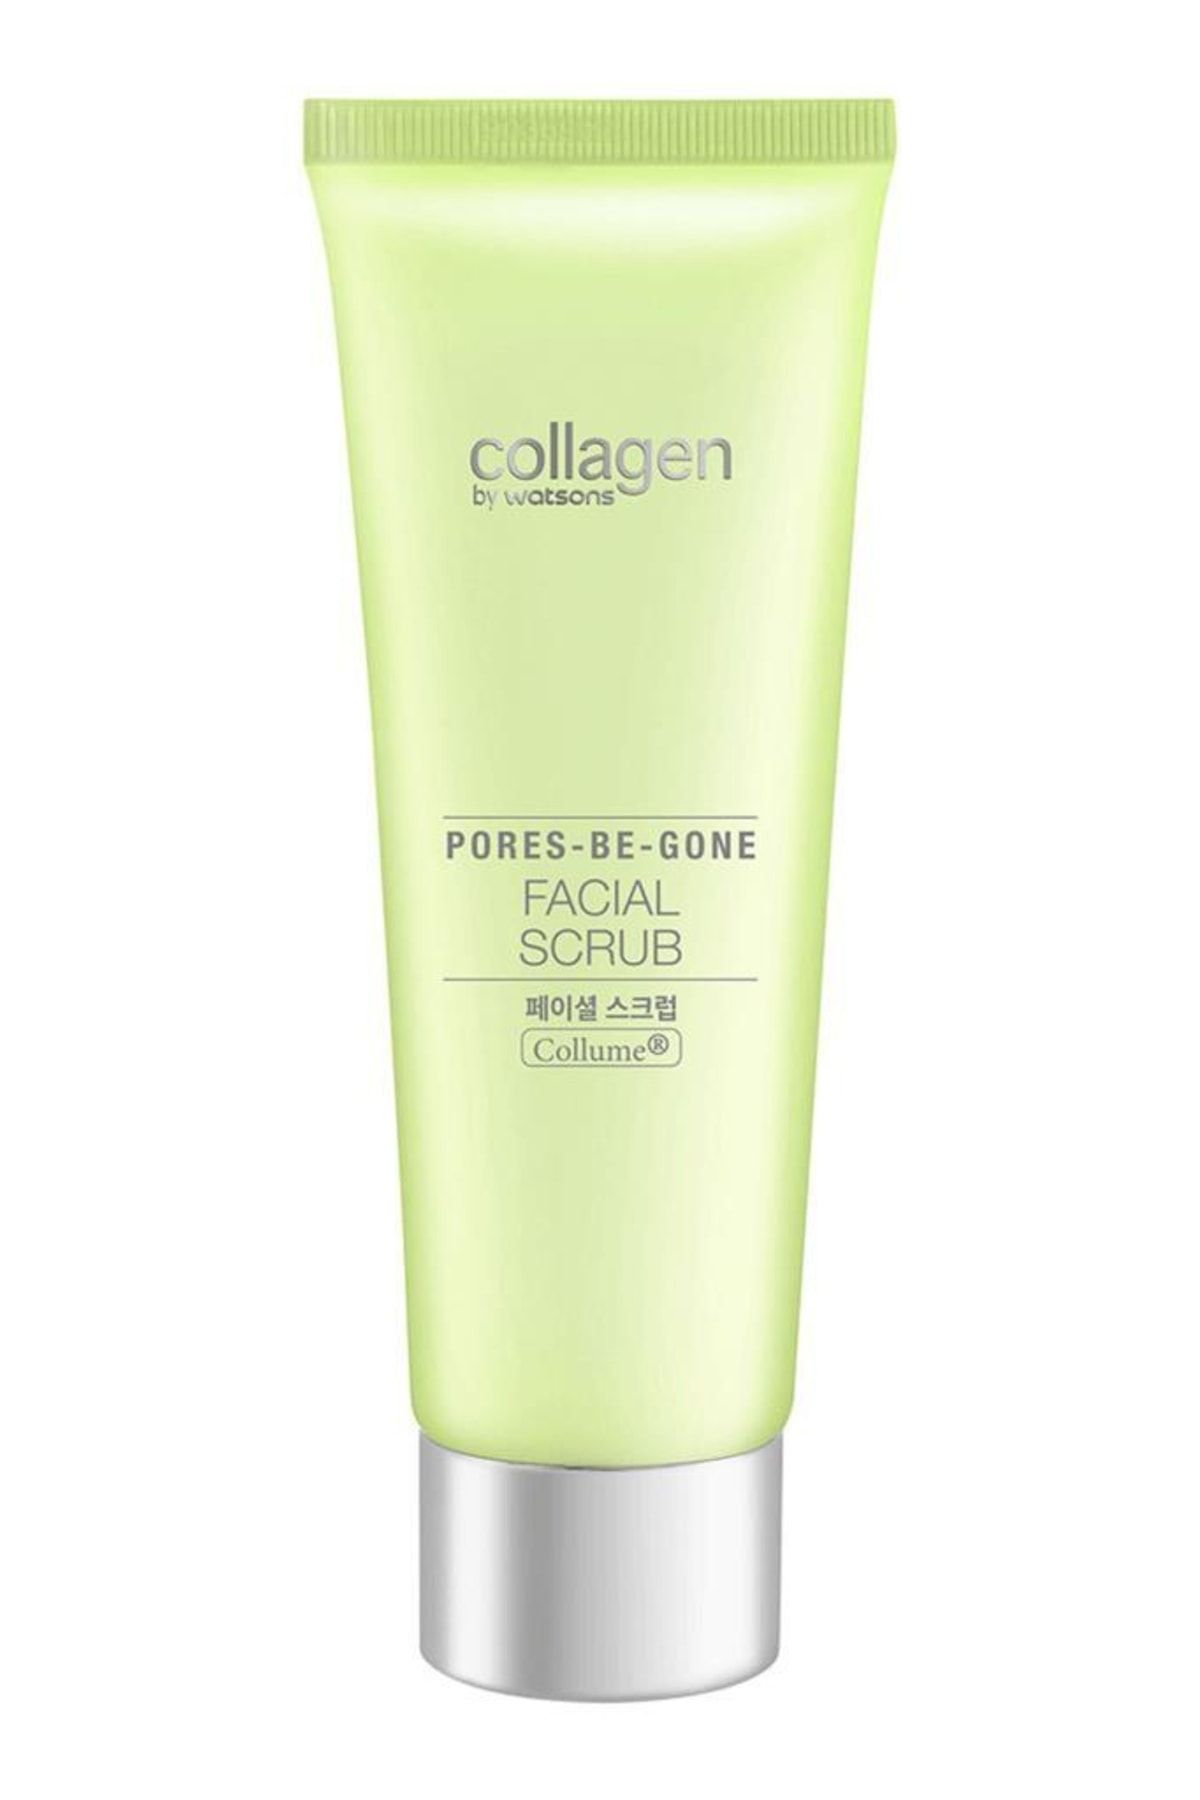 Collagen by Watsons Pores-be-gone Fac.scrub 125ml